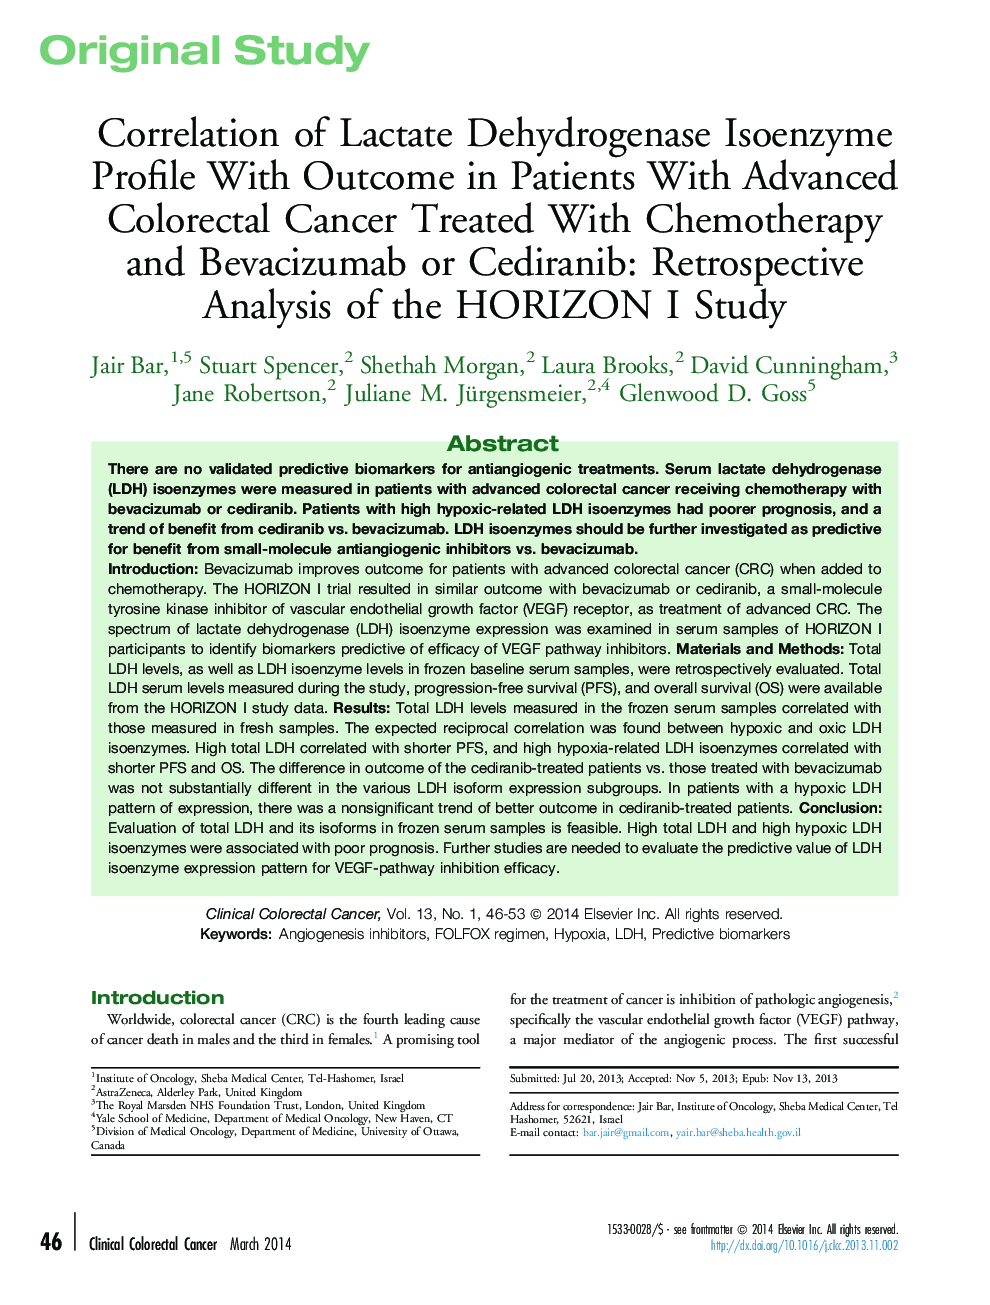 Correlation of Lactate Dehydrogenase Isoenzyme Profile With Outcome in Patients With Advanced Colorectal Cancer Treated With Chemotherapy and Bevacizumab or Cediranib: Retrospective Analysis of the HORIZON I Study